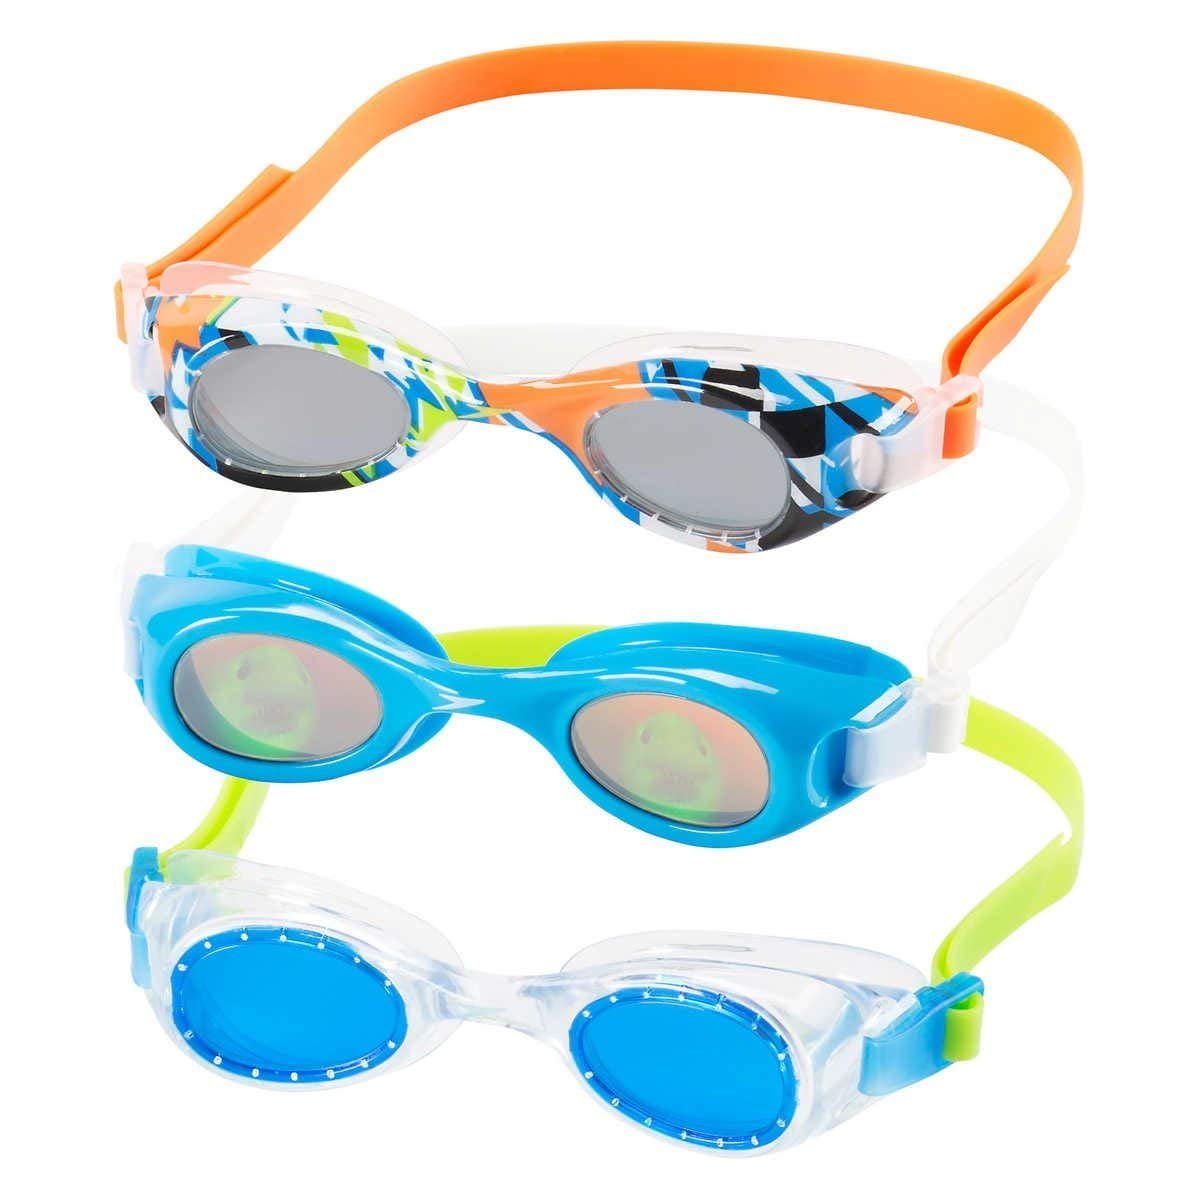 Details about   New Speedo Kids Glide Orange And Pink Goggles Size 3-8 